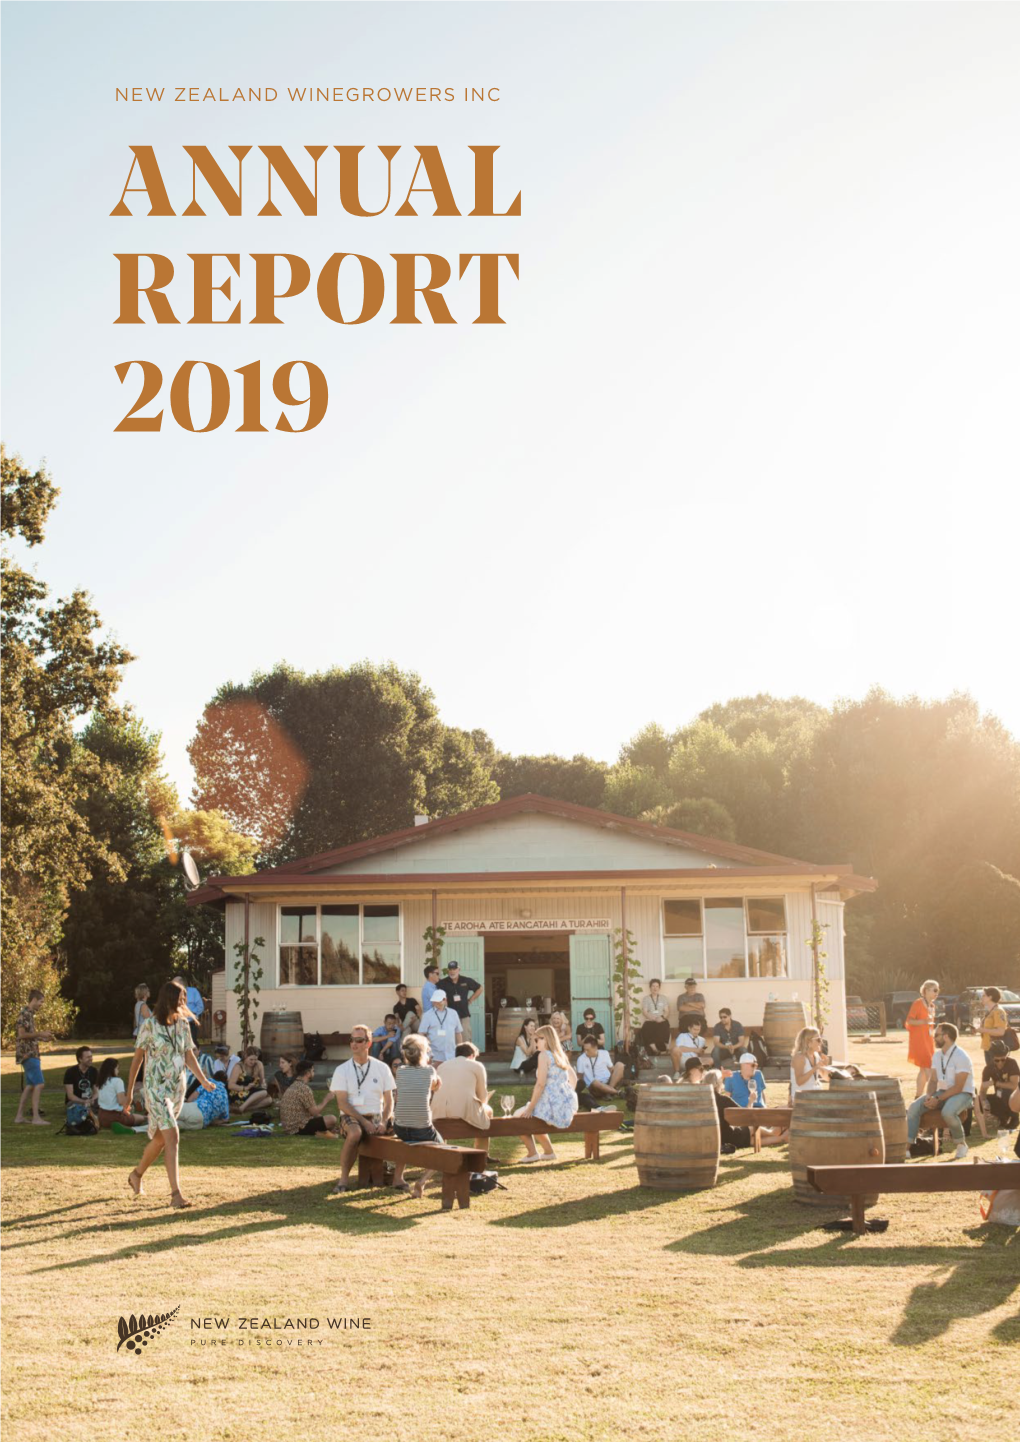 NZ Winegrowers Annual Report 2019